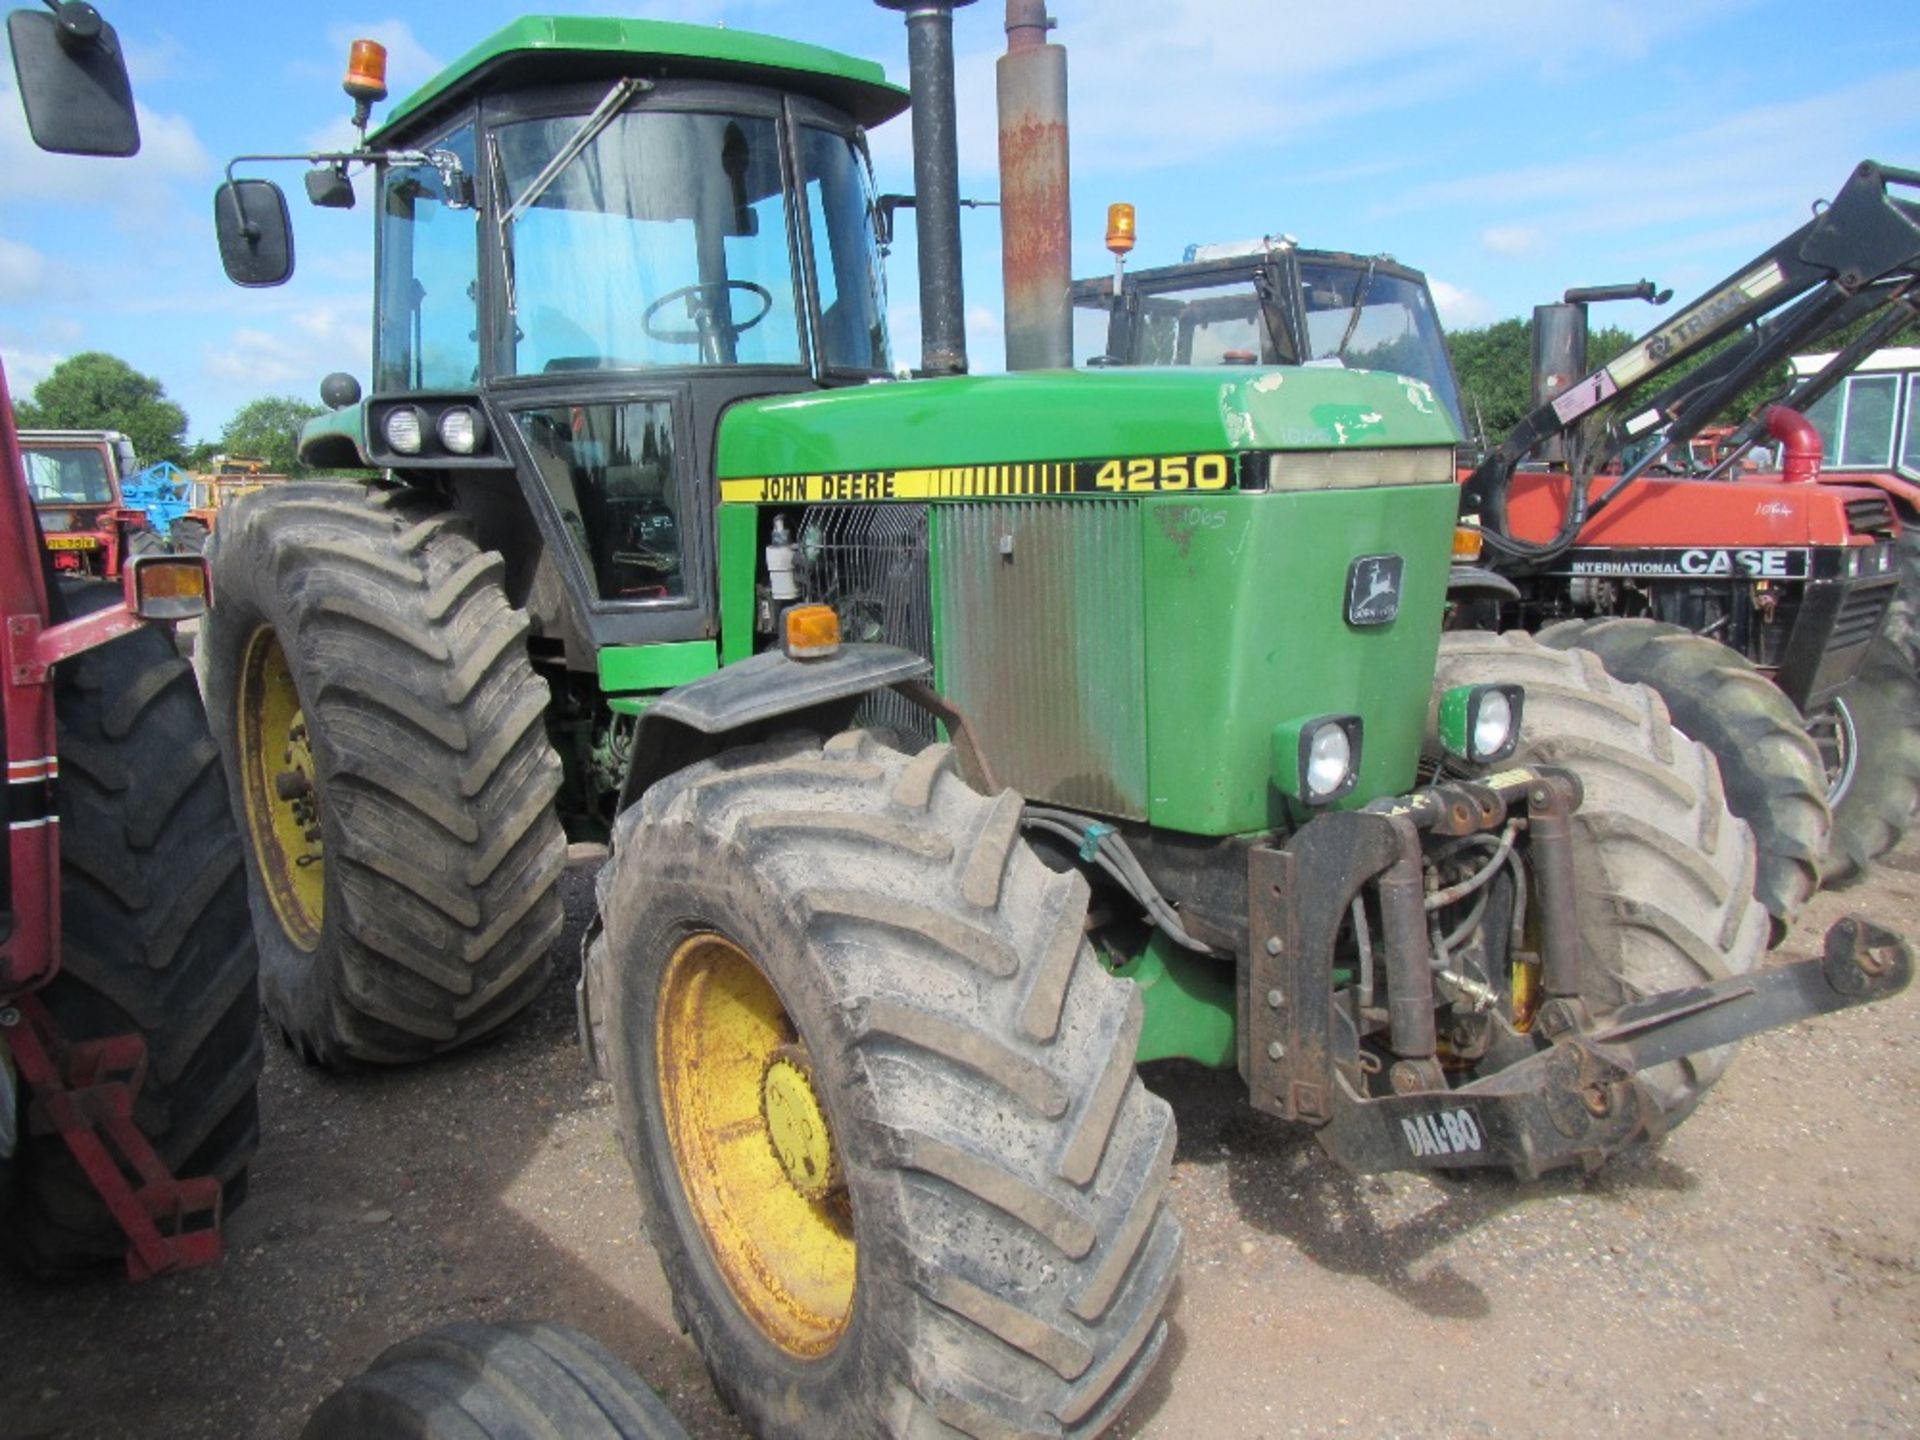 John Deere 4250 Tractor. 1st Regd 19/1/88. V5 has been applied for. Ser. No. RW4250E013056 - Image 3 of 16